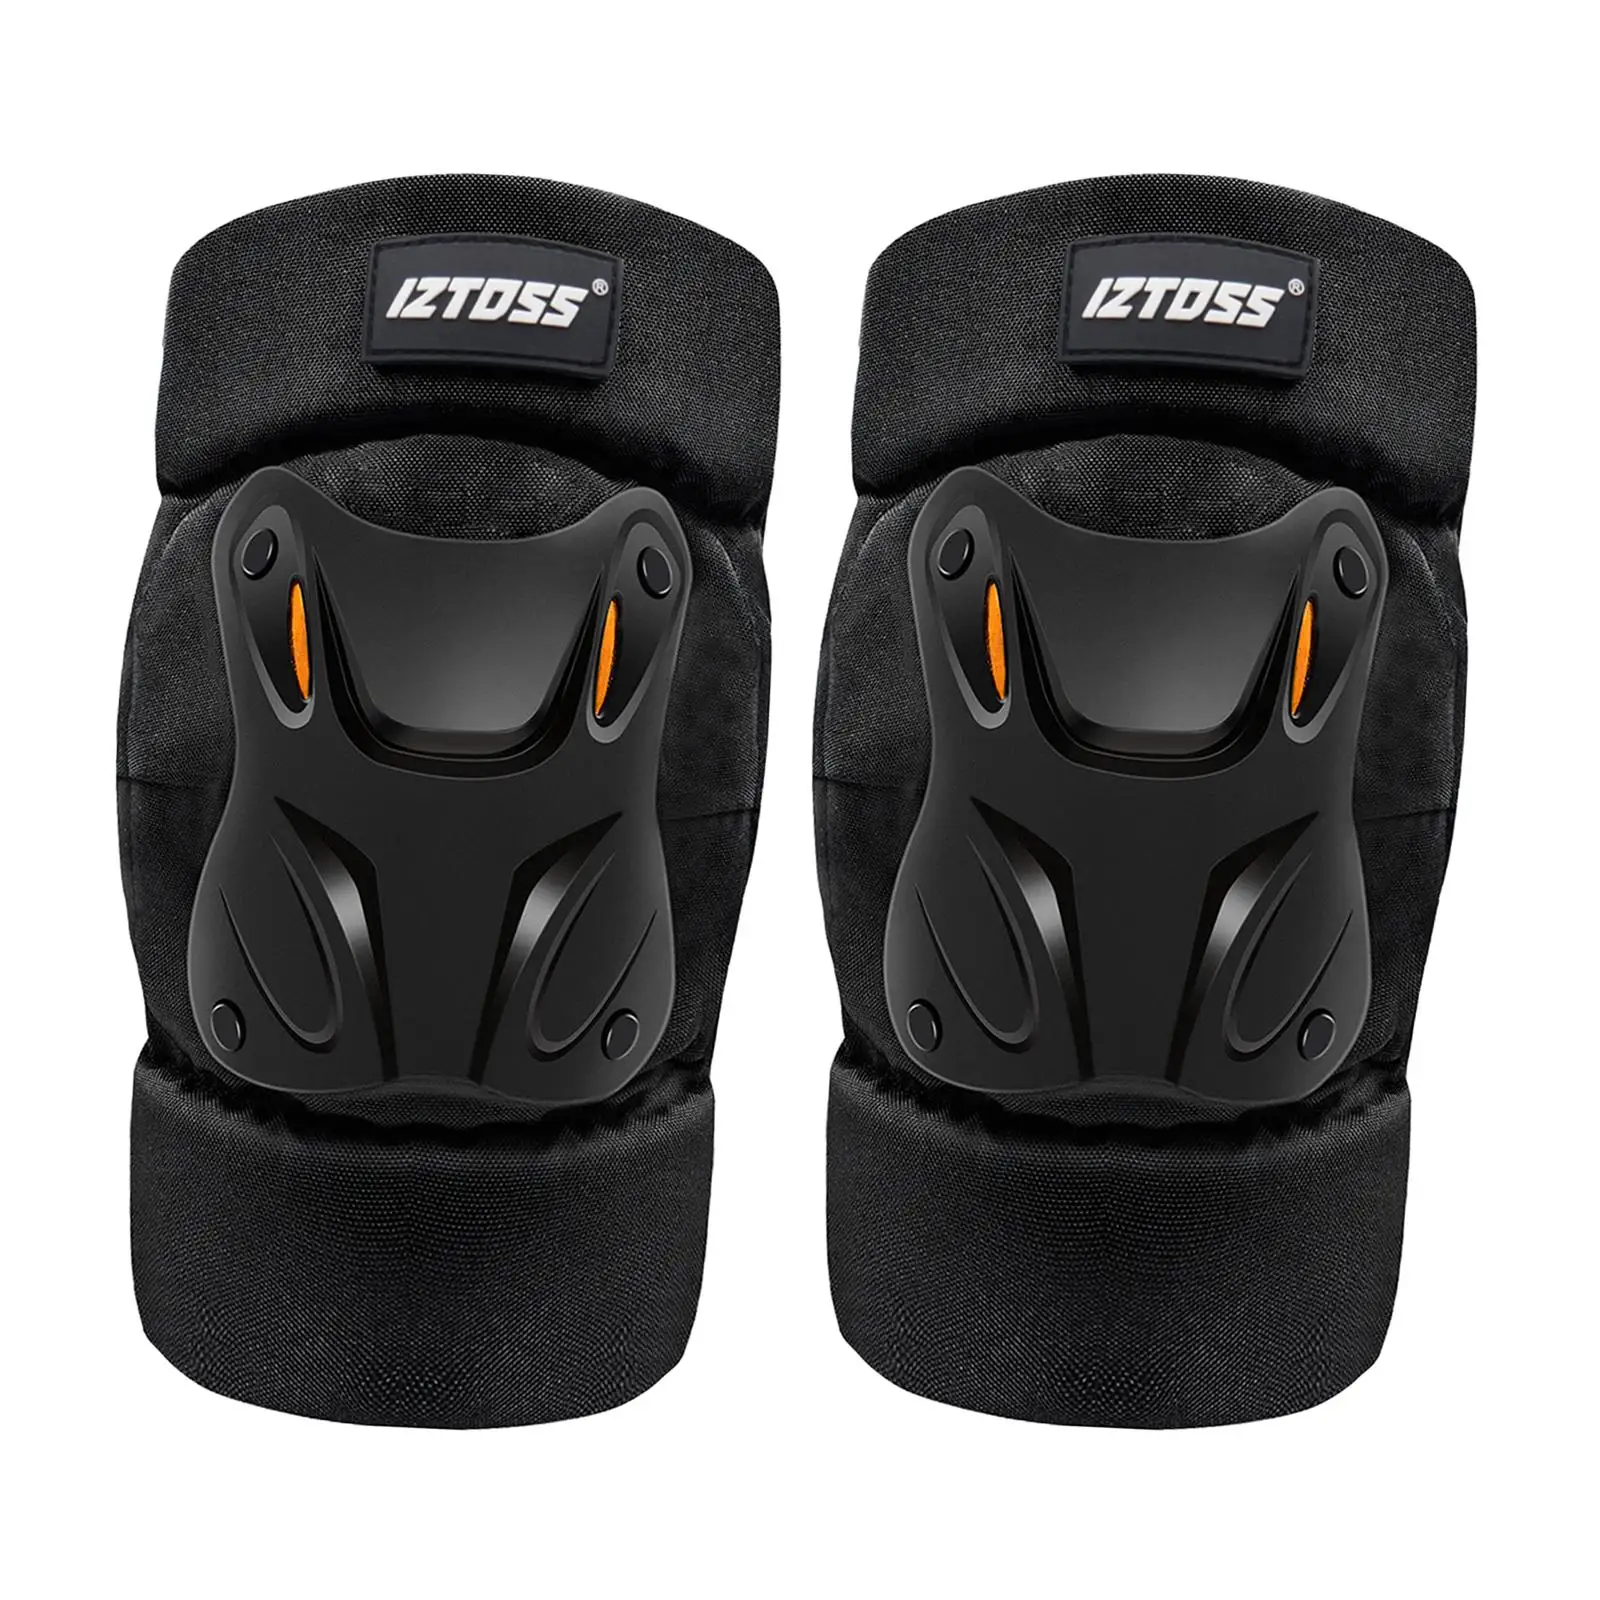 2x Motocross Knee Guard Protector Elbow Pads Breathable Motorcycle Knee Pad for Mountain Biking Balance Bike Scooter Riding